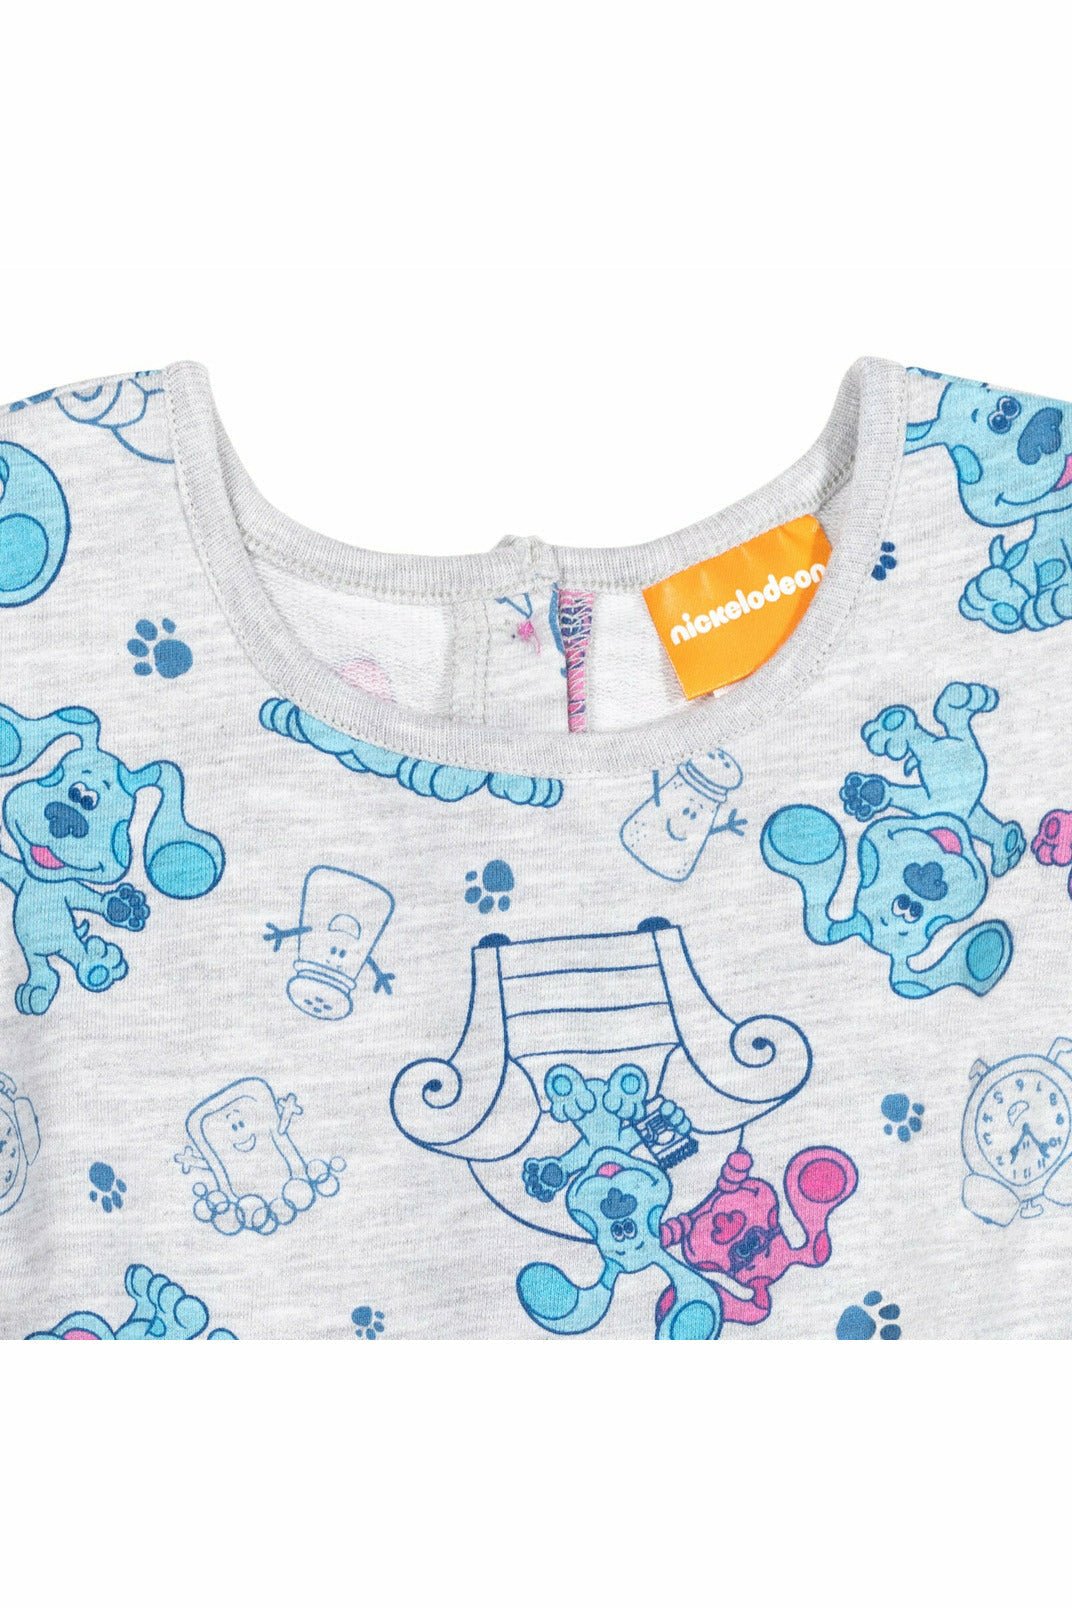 Blue's Clues French Terry Sleeveless Romper - imagikids